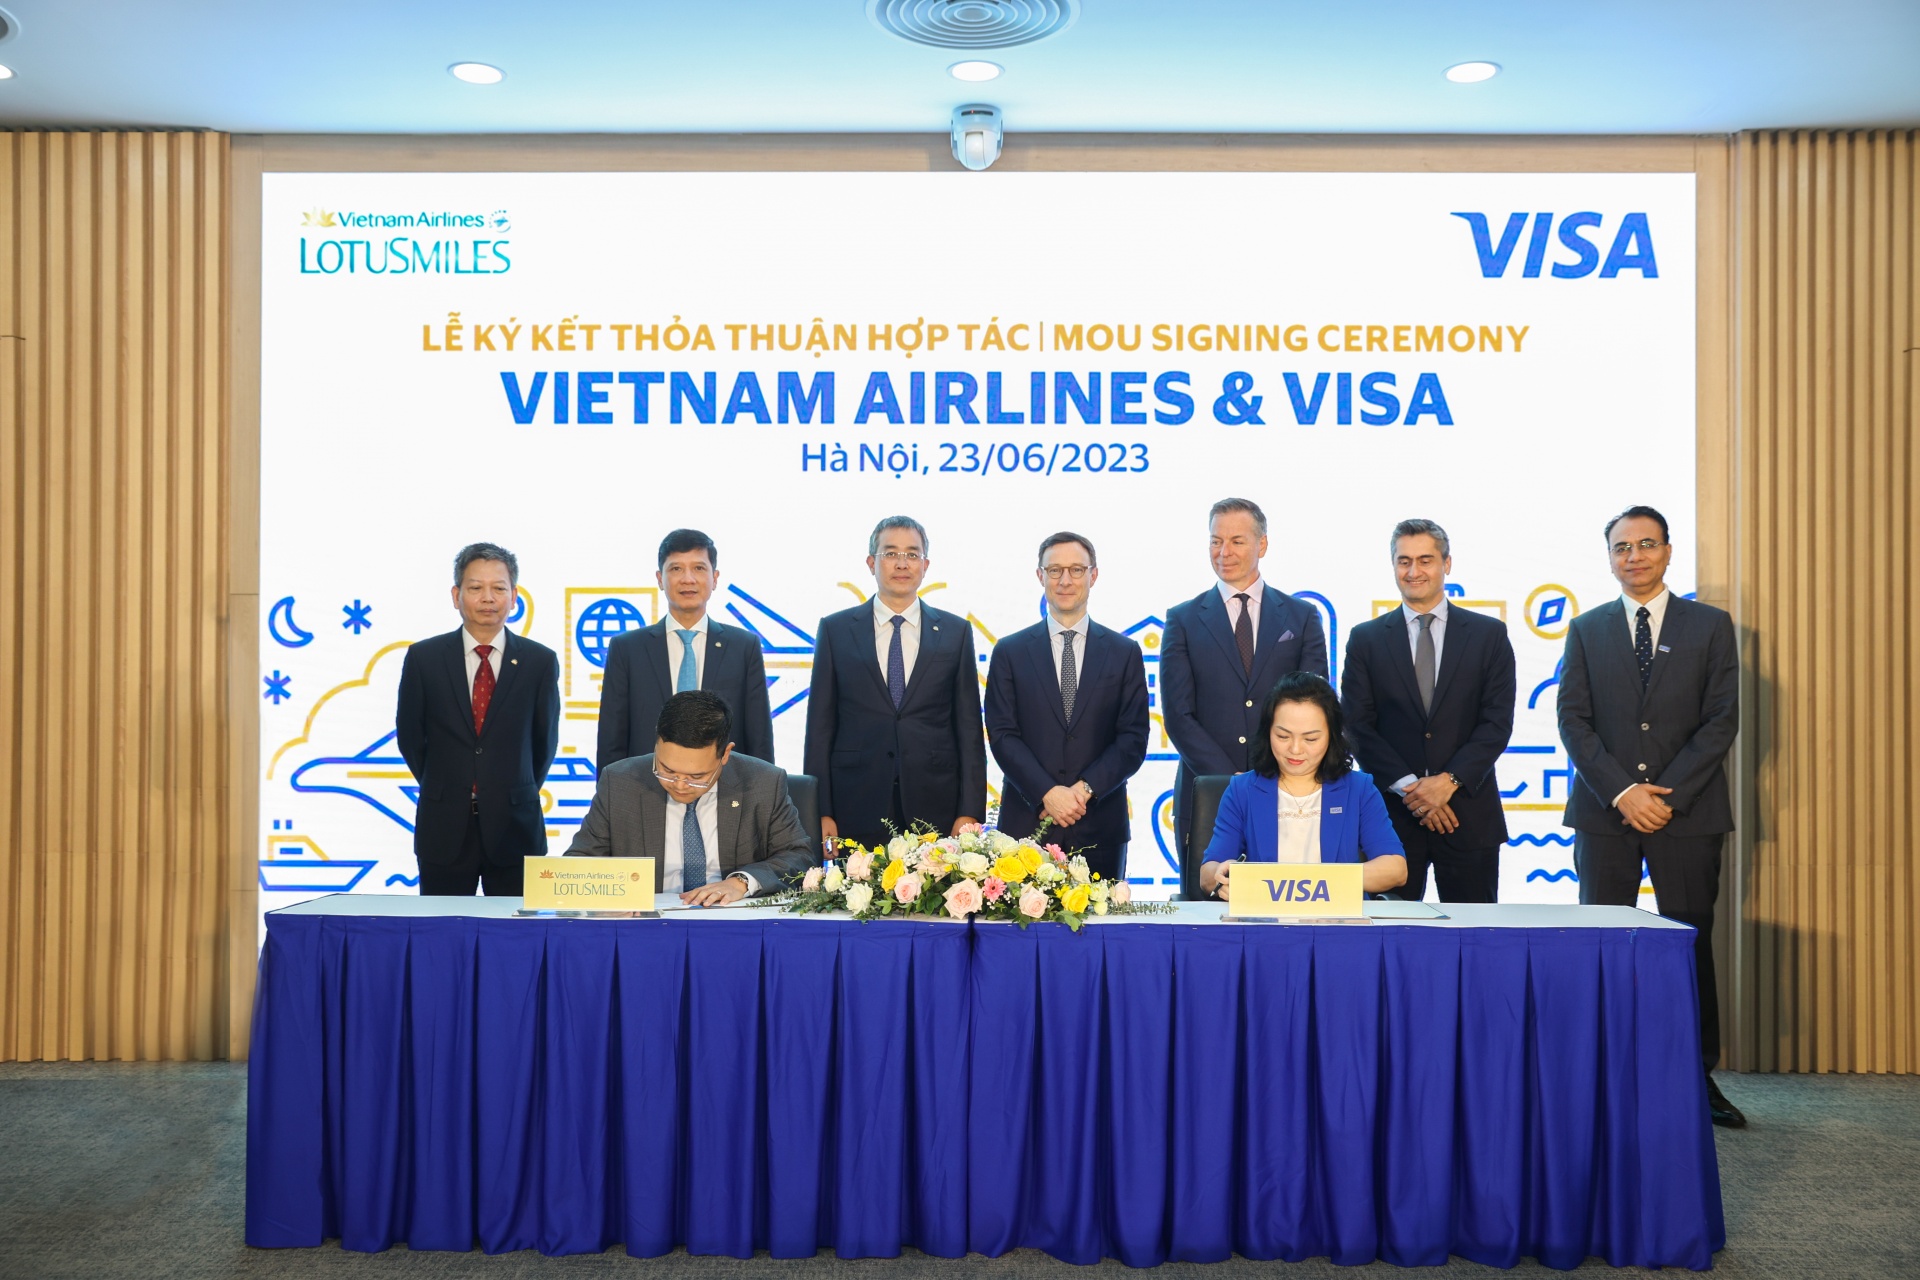 The MoU Signing Ceremony between Vietnam Airlines and Visa